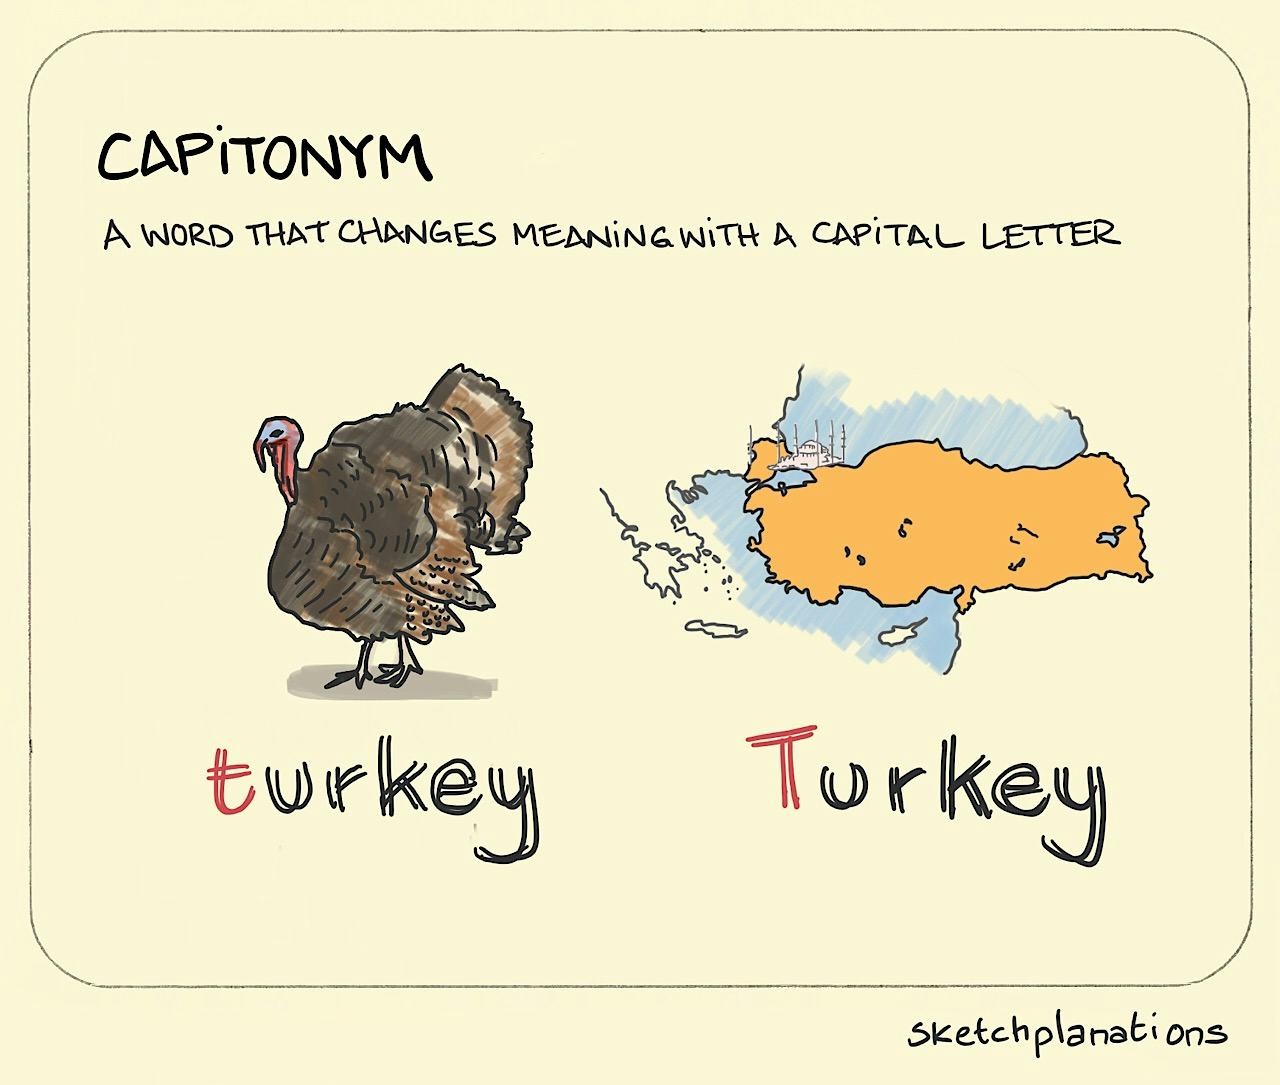 Capitonym illustration: a large turkey and a map of the country Turkey shows how adding a capital changes the meaning